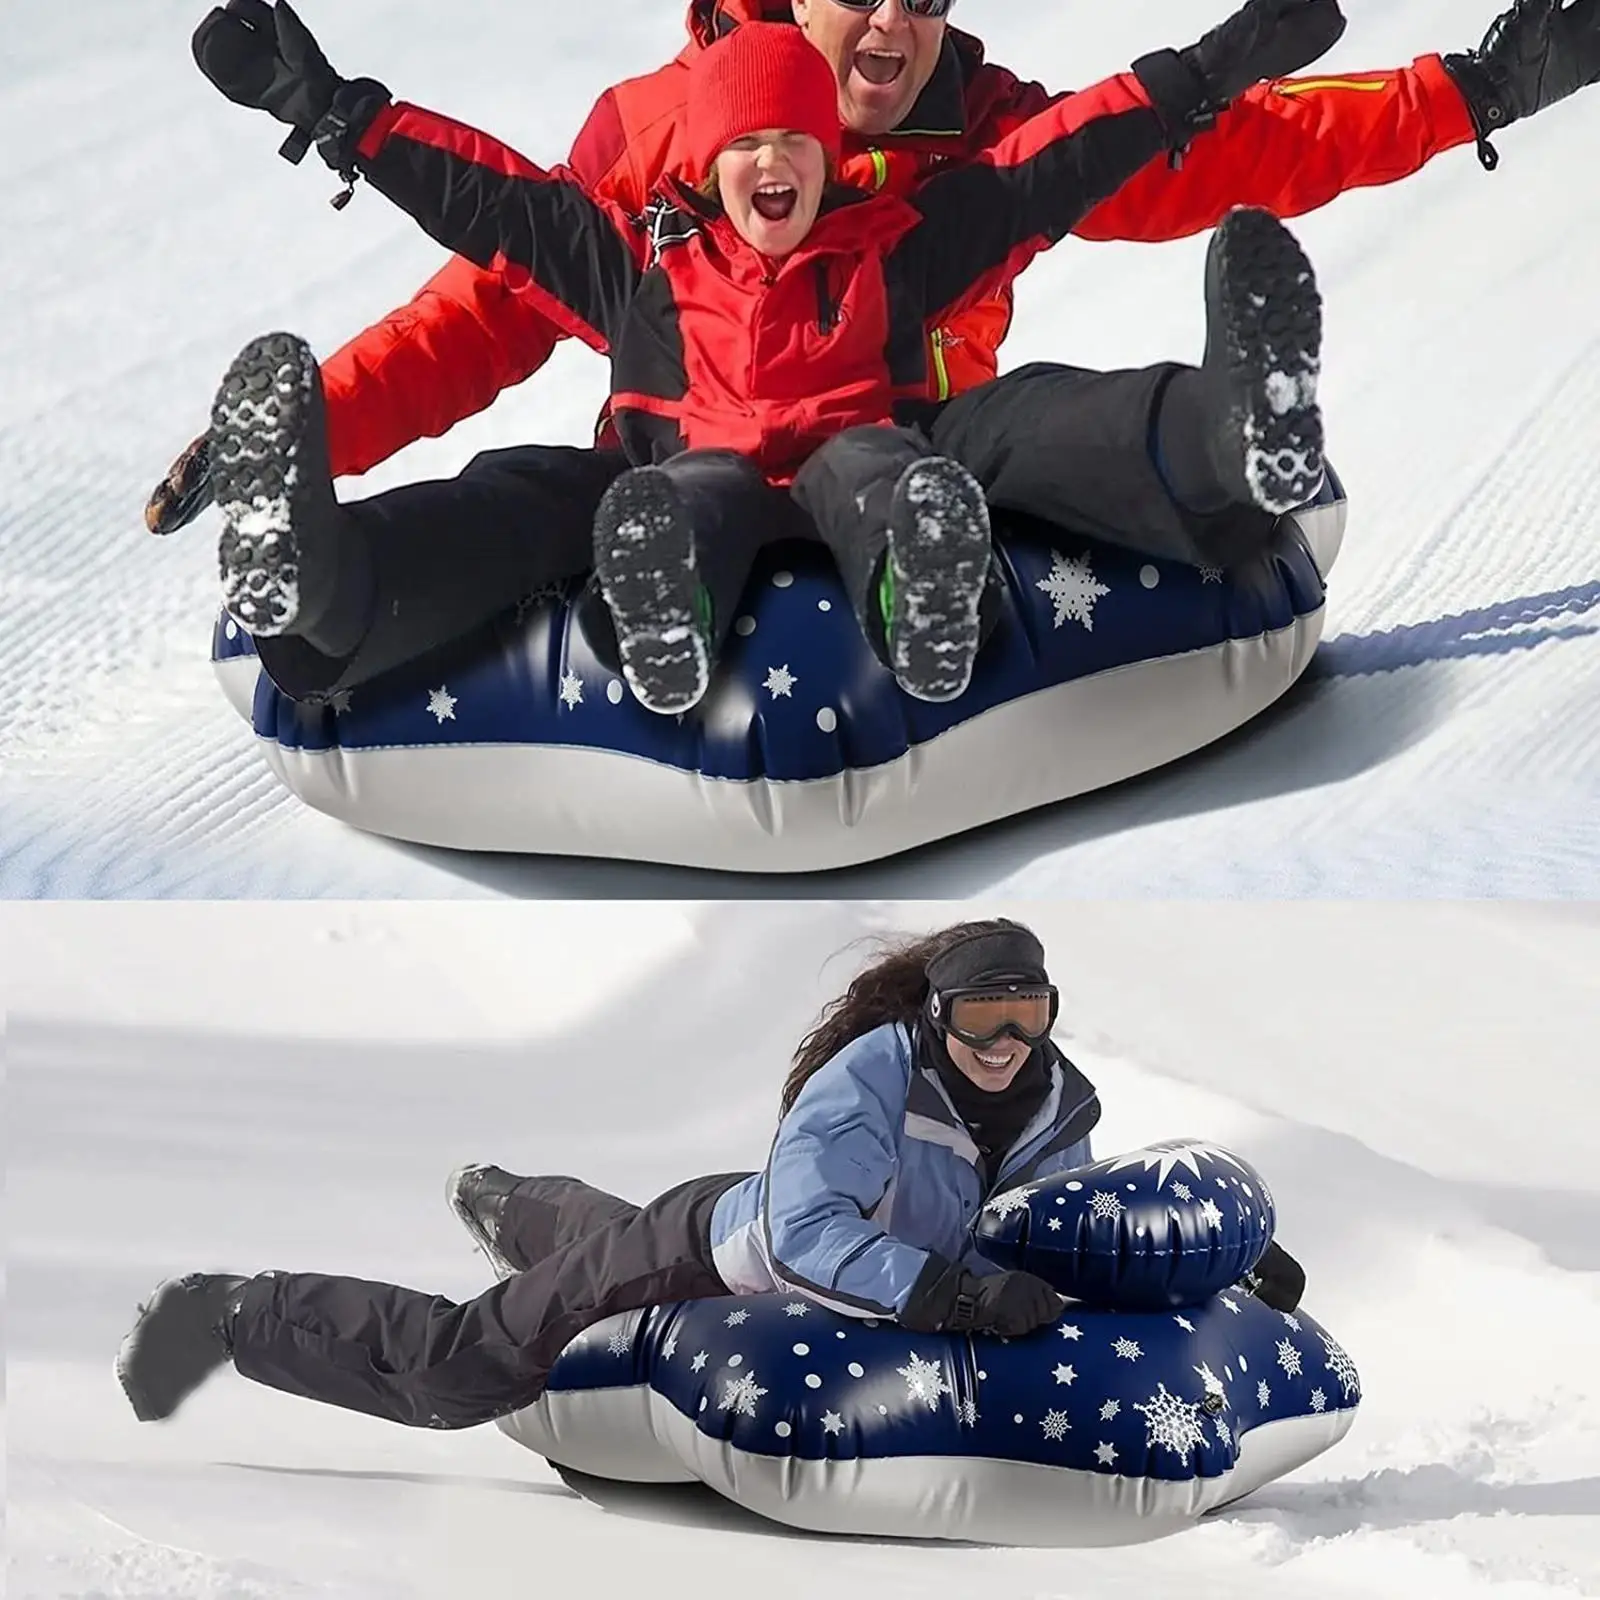 Winter Snow Tube Heavy Duty Inflatable Sled for Kids and Adults